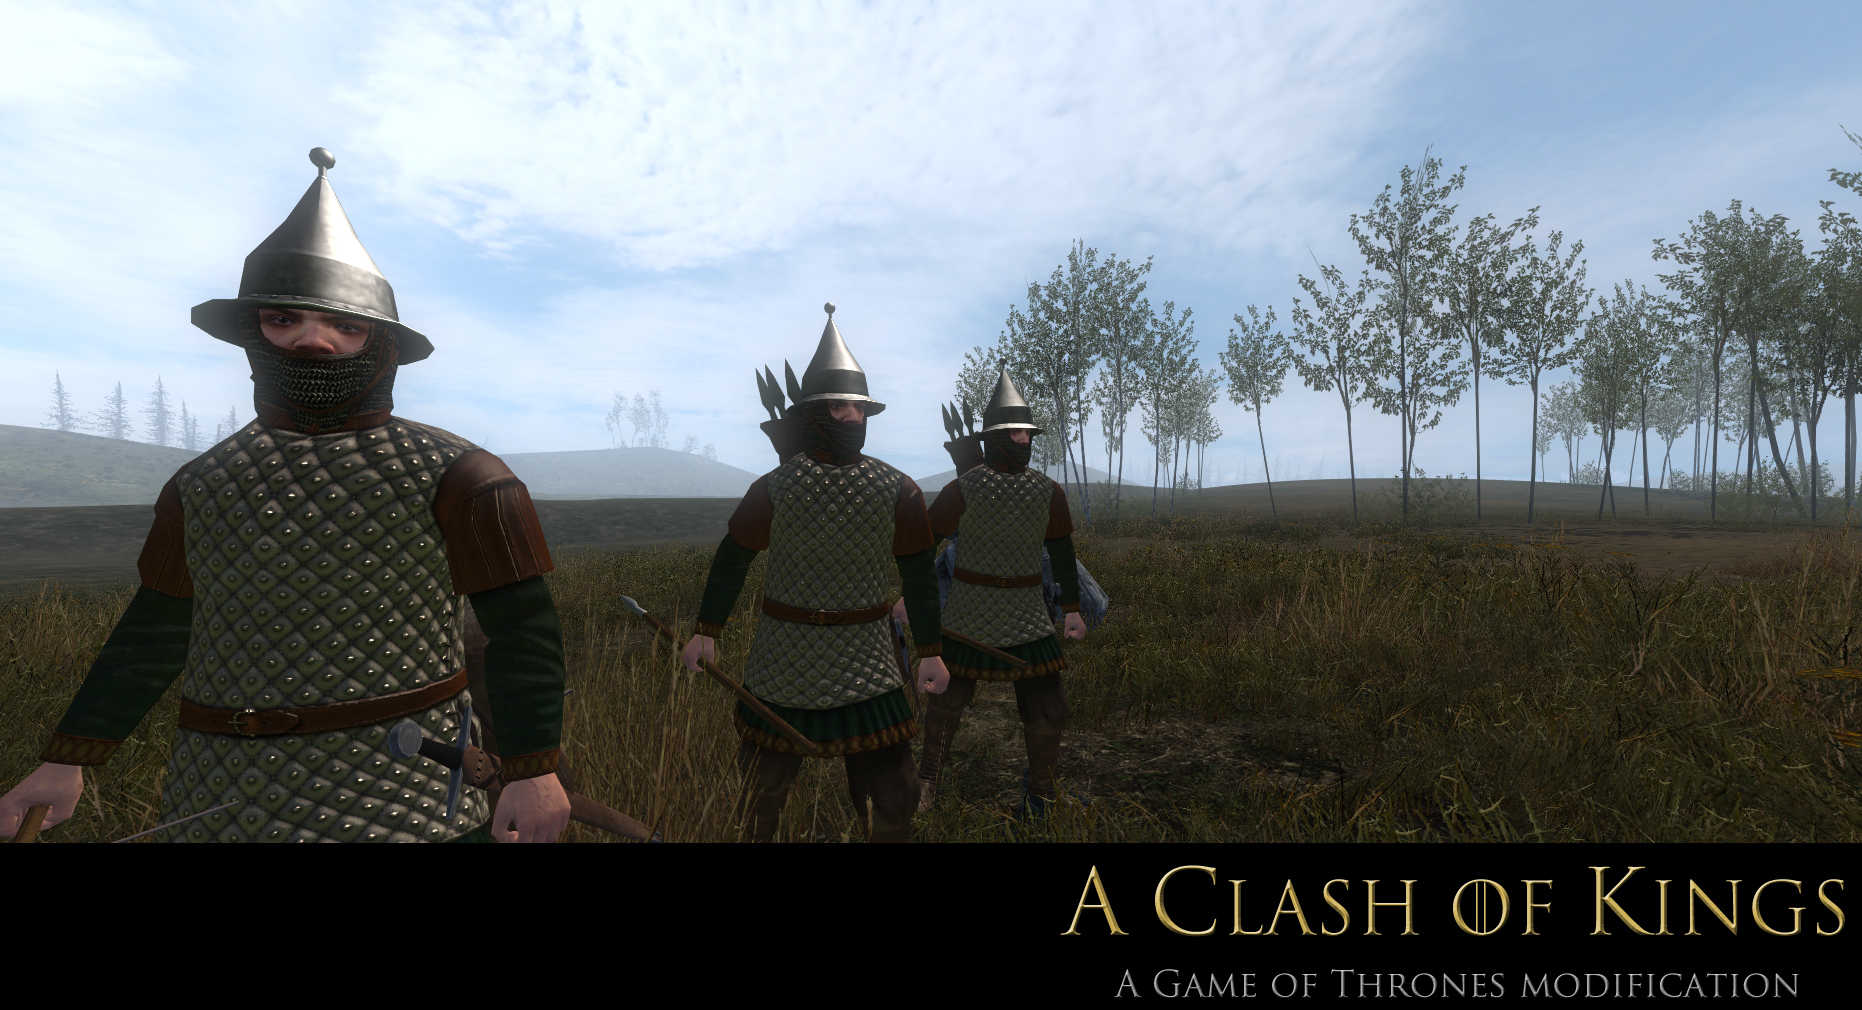 Warband король. Mount and Blade: Warband – a Clash of Kings. Clash of Kings для Маунт блейд варбанд. A Clash of Kings (game of Thrones).